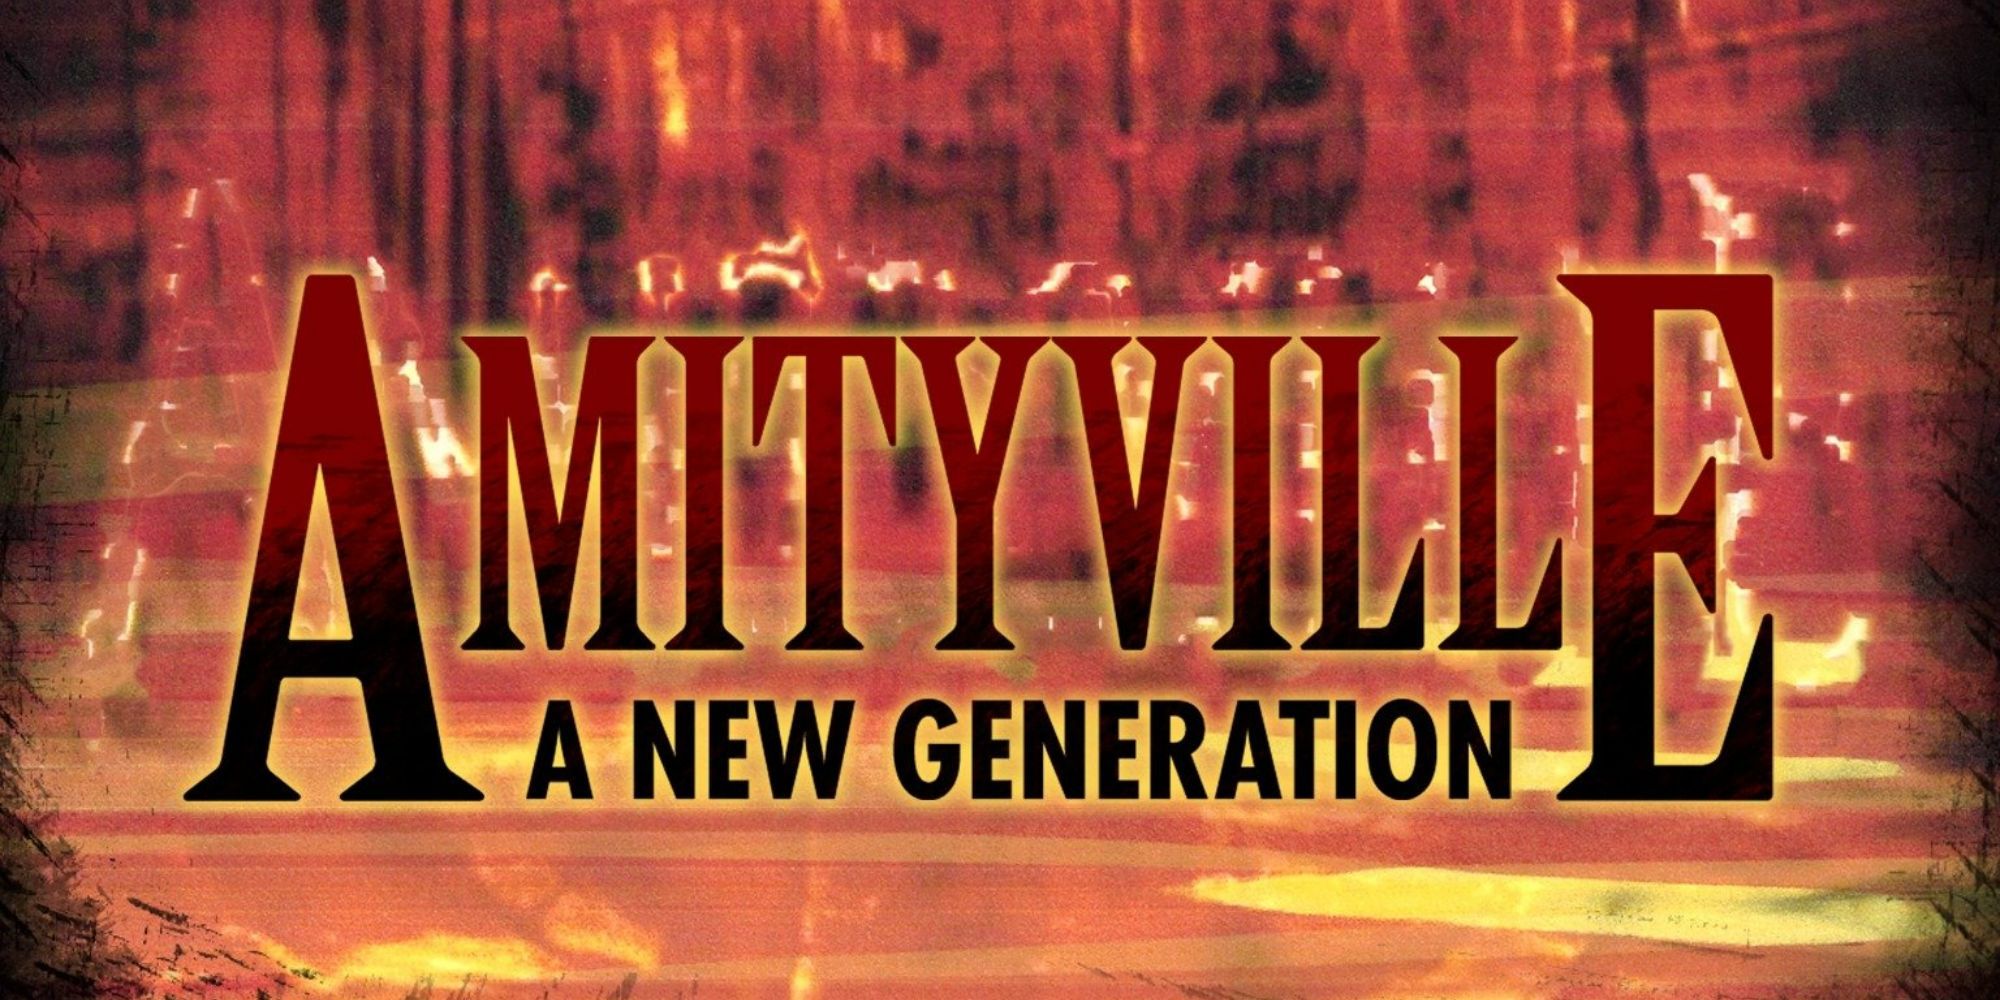 The title card for Amityville: A New Generation